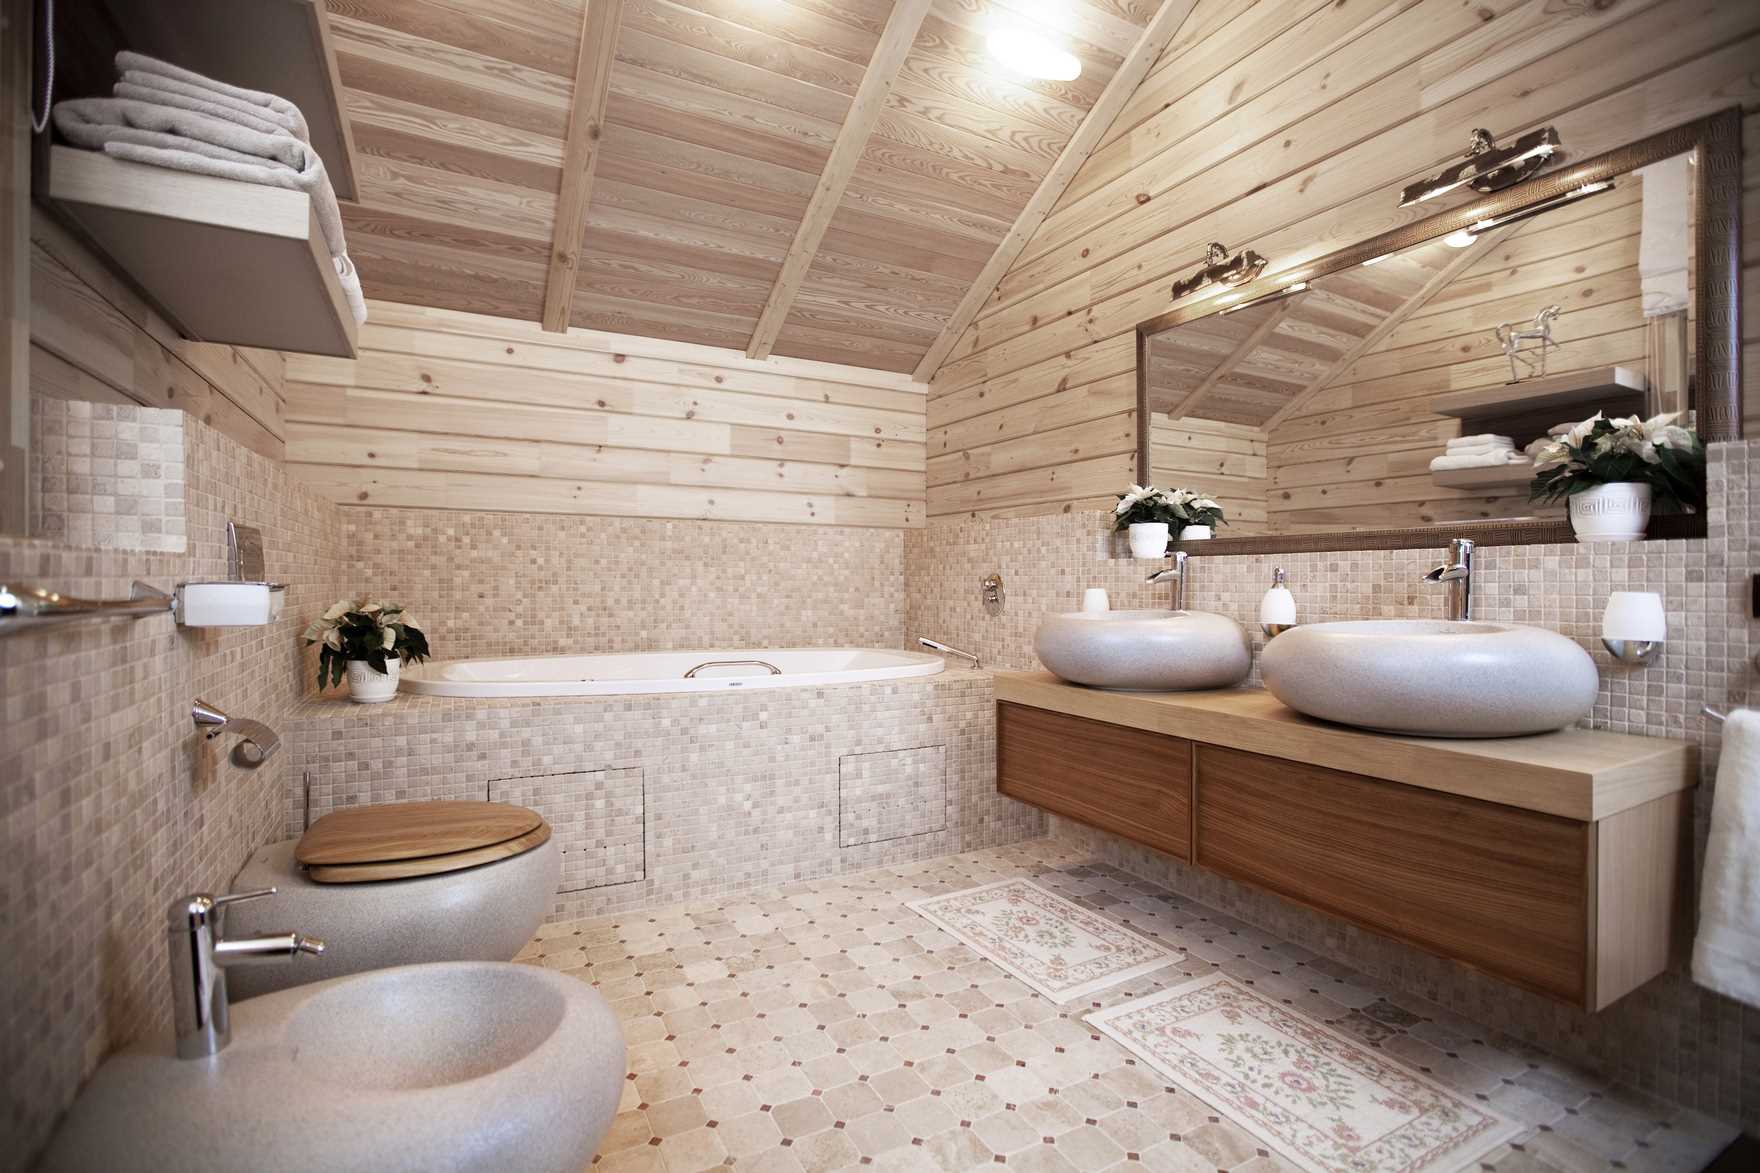 version of the unusual design of the bathroom in a wooden house